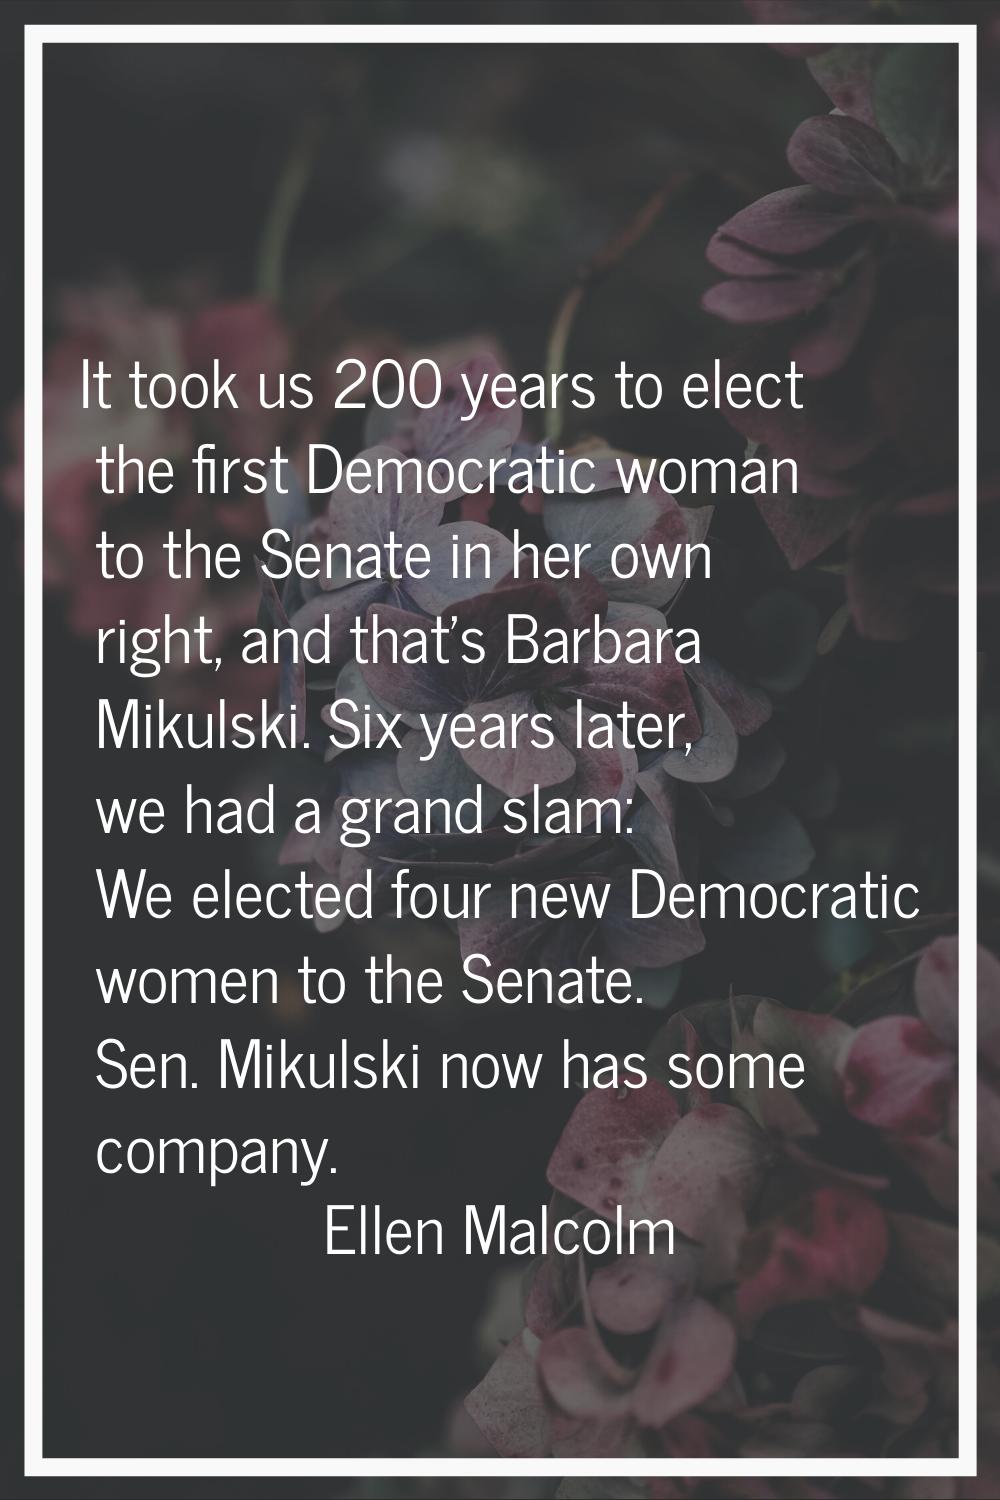 It took us 200 years to elect the first Democratic woman to the Senate in her own right, and that's